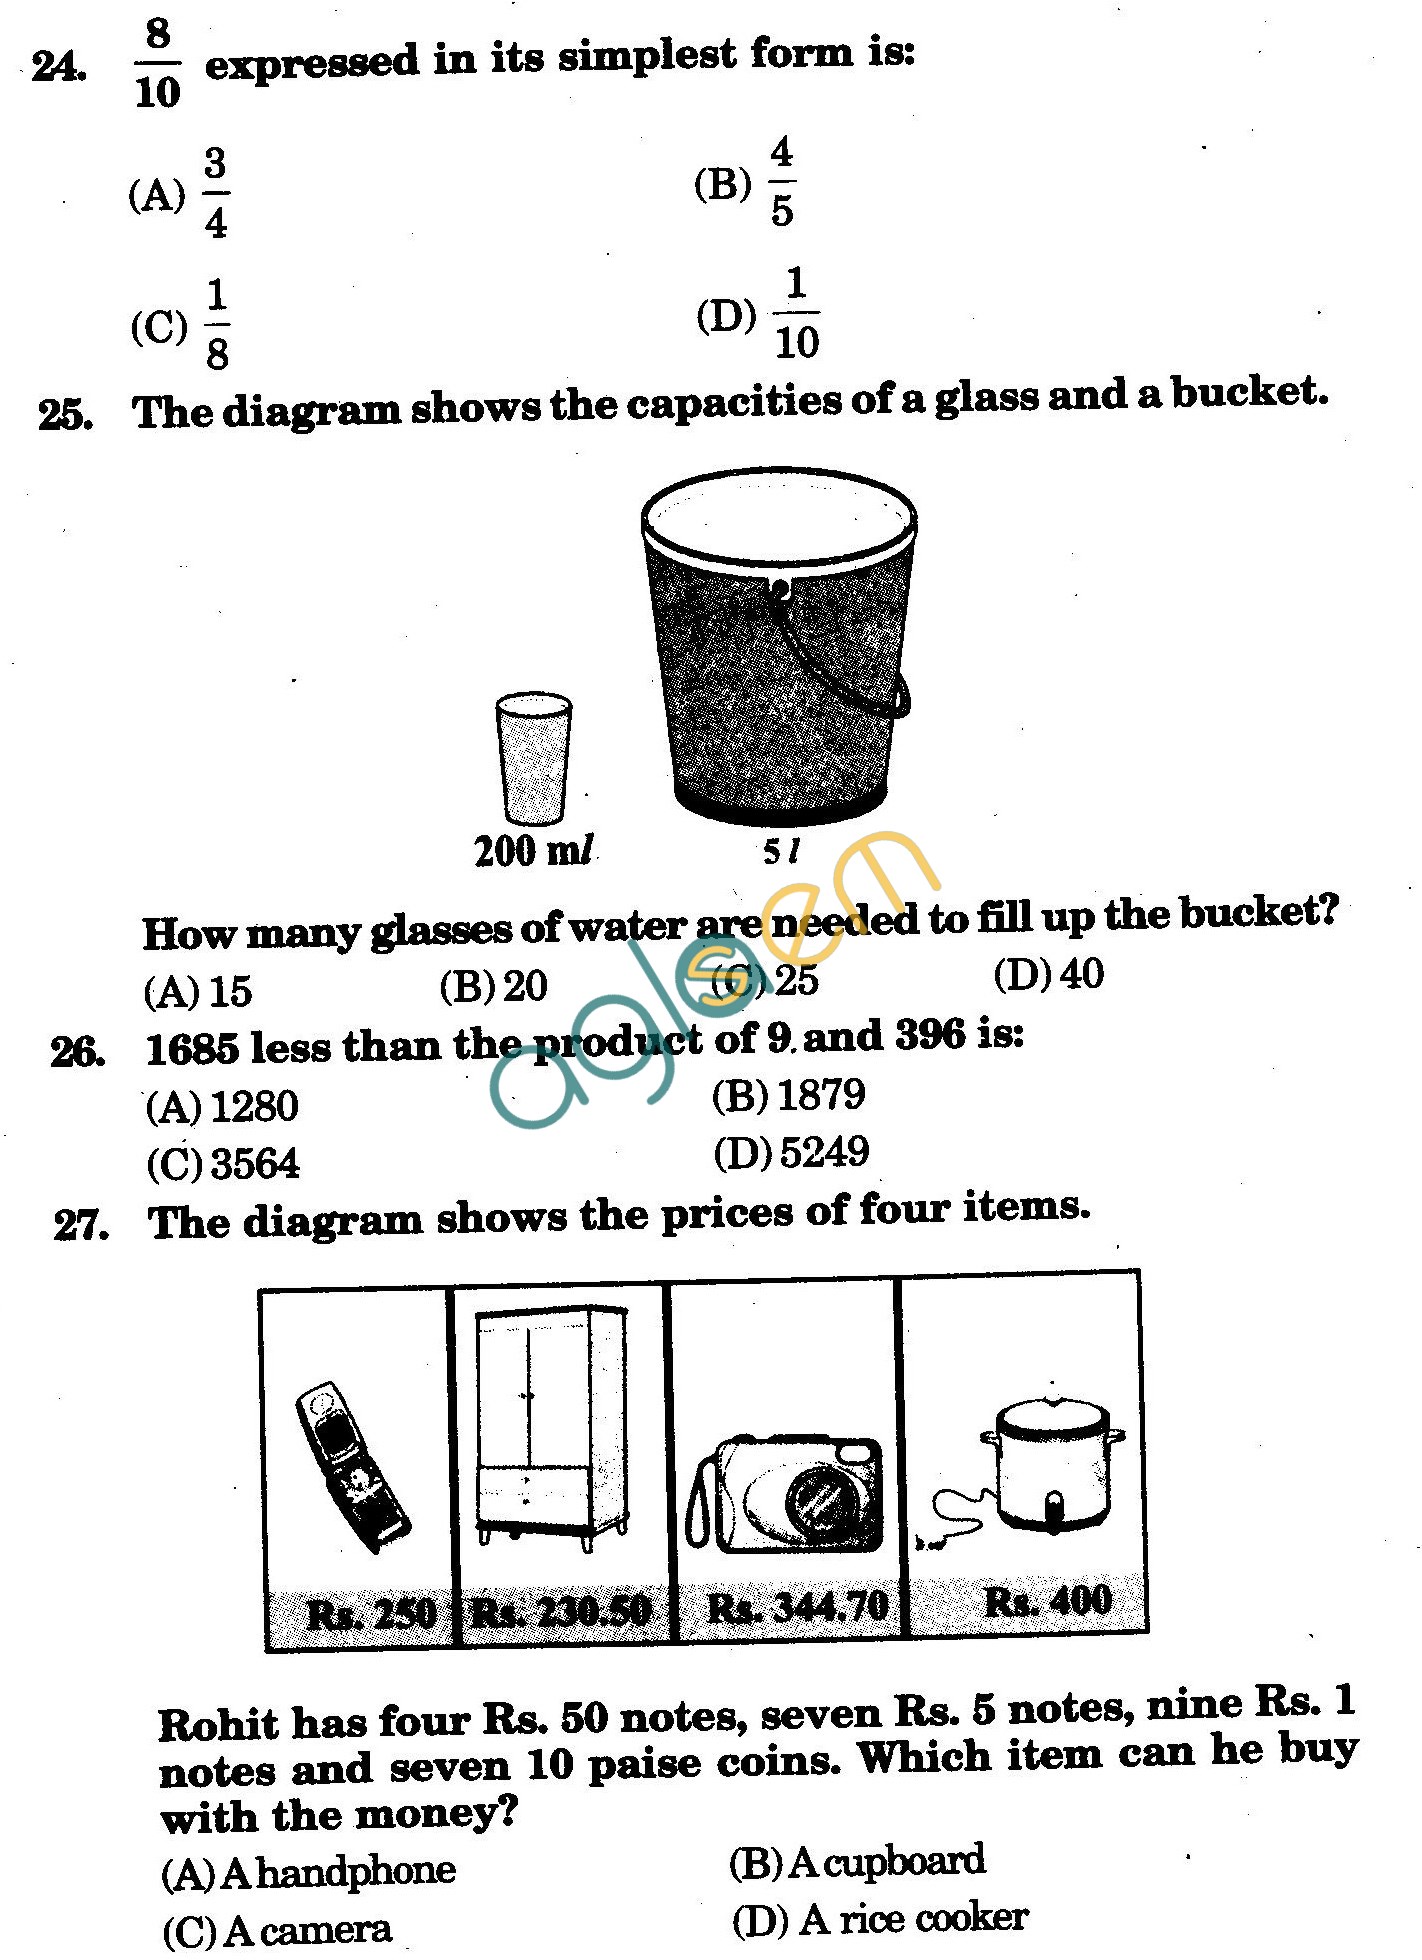 NSTSE 2010 Class IV Question Paper with Answers - Mathematics